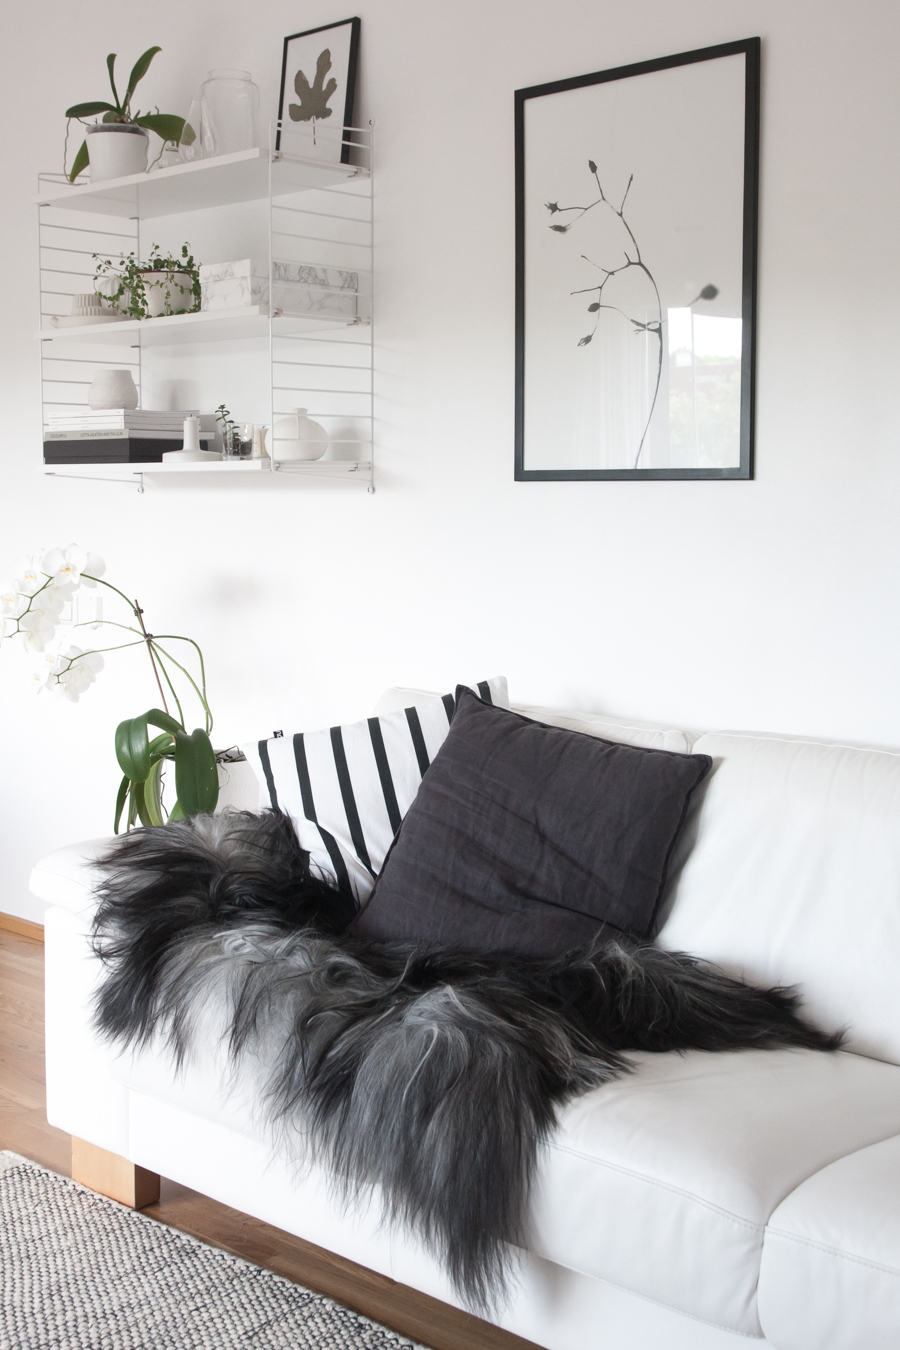 A Monochrome Interior Tips For Styling A Monochrome Living Room